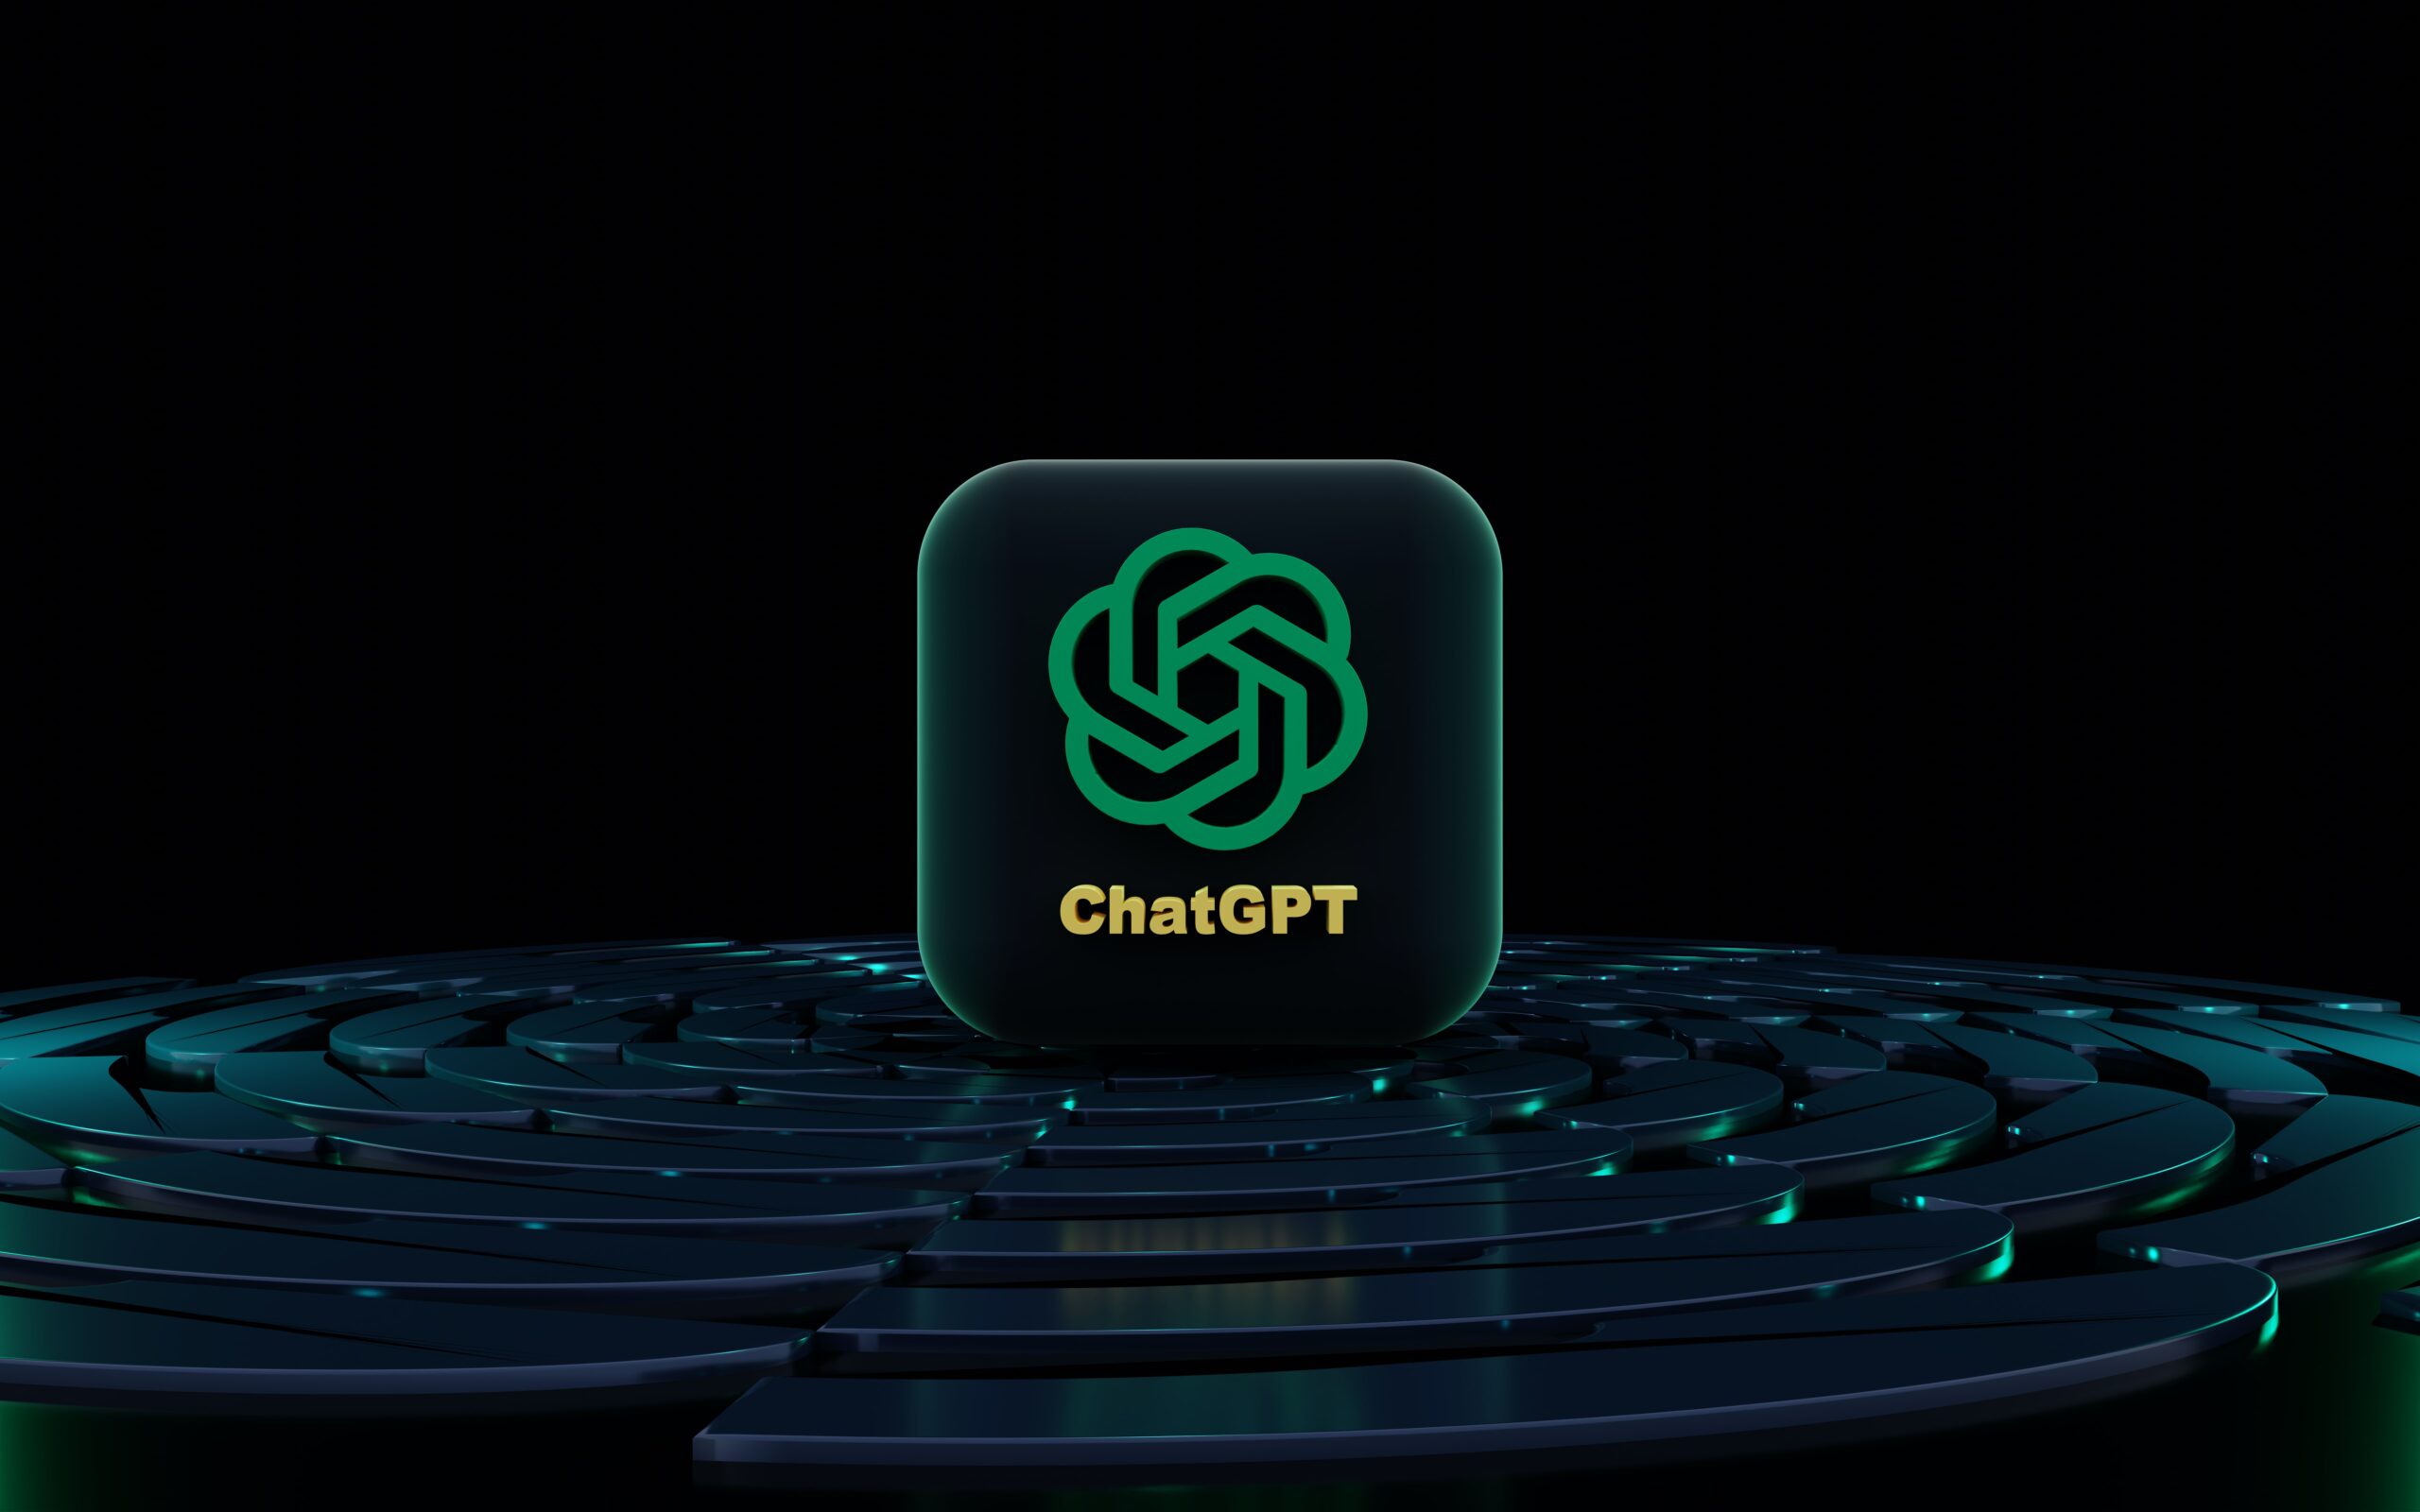 Who Owns Chat GPT & Started it